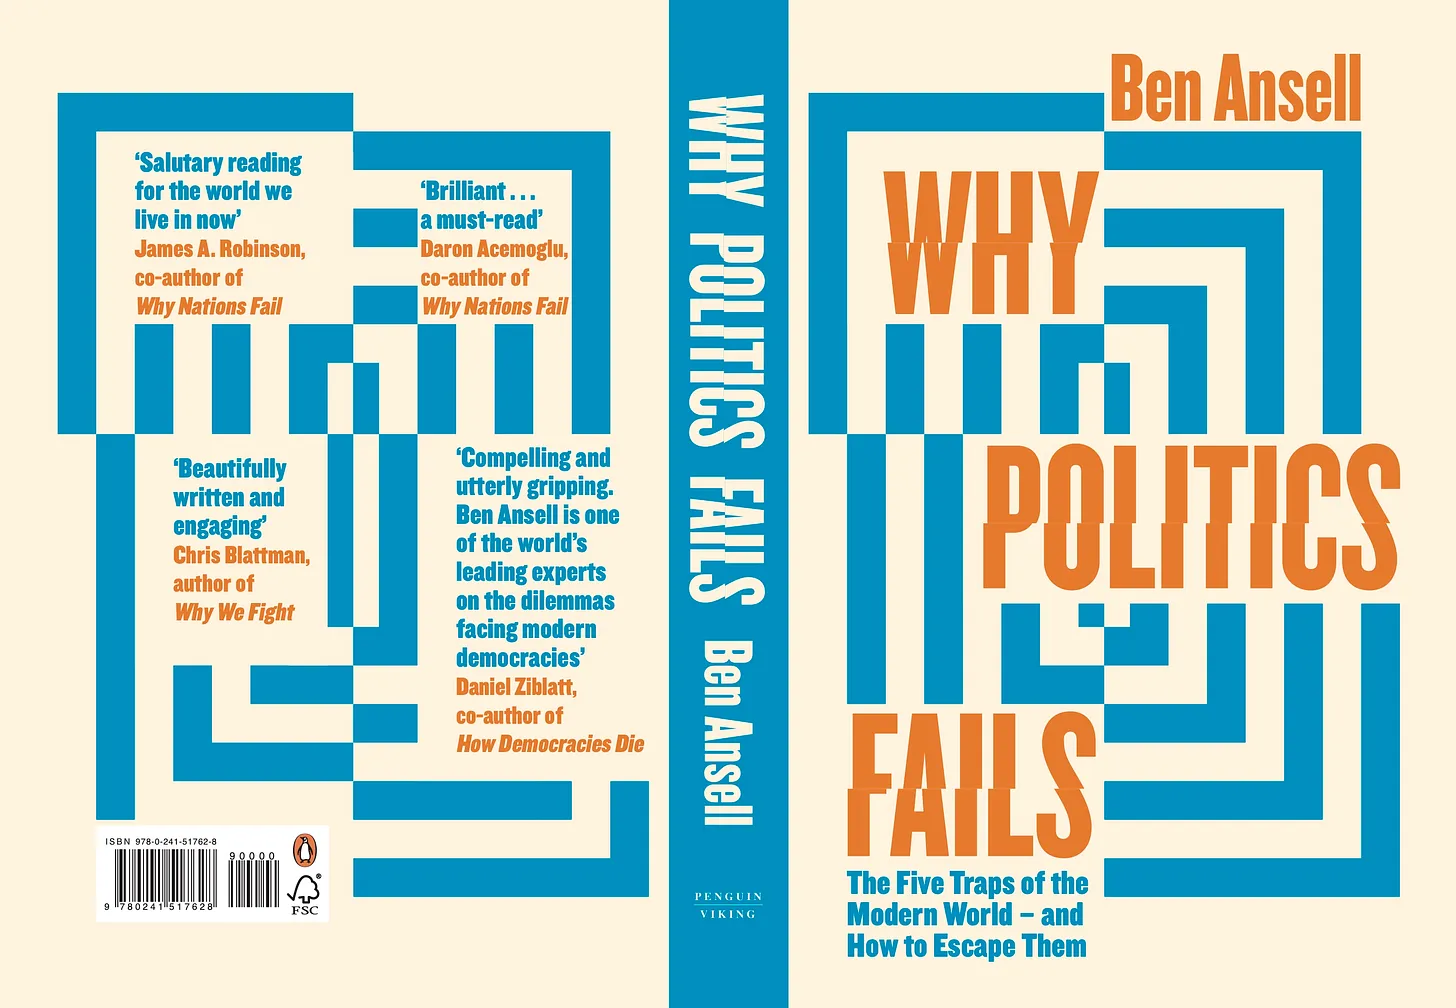 Why Politics Fails: Out in the UK Today